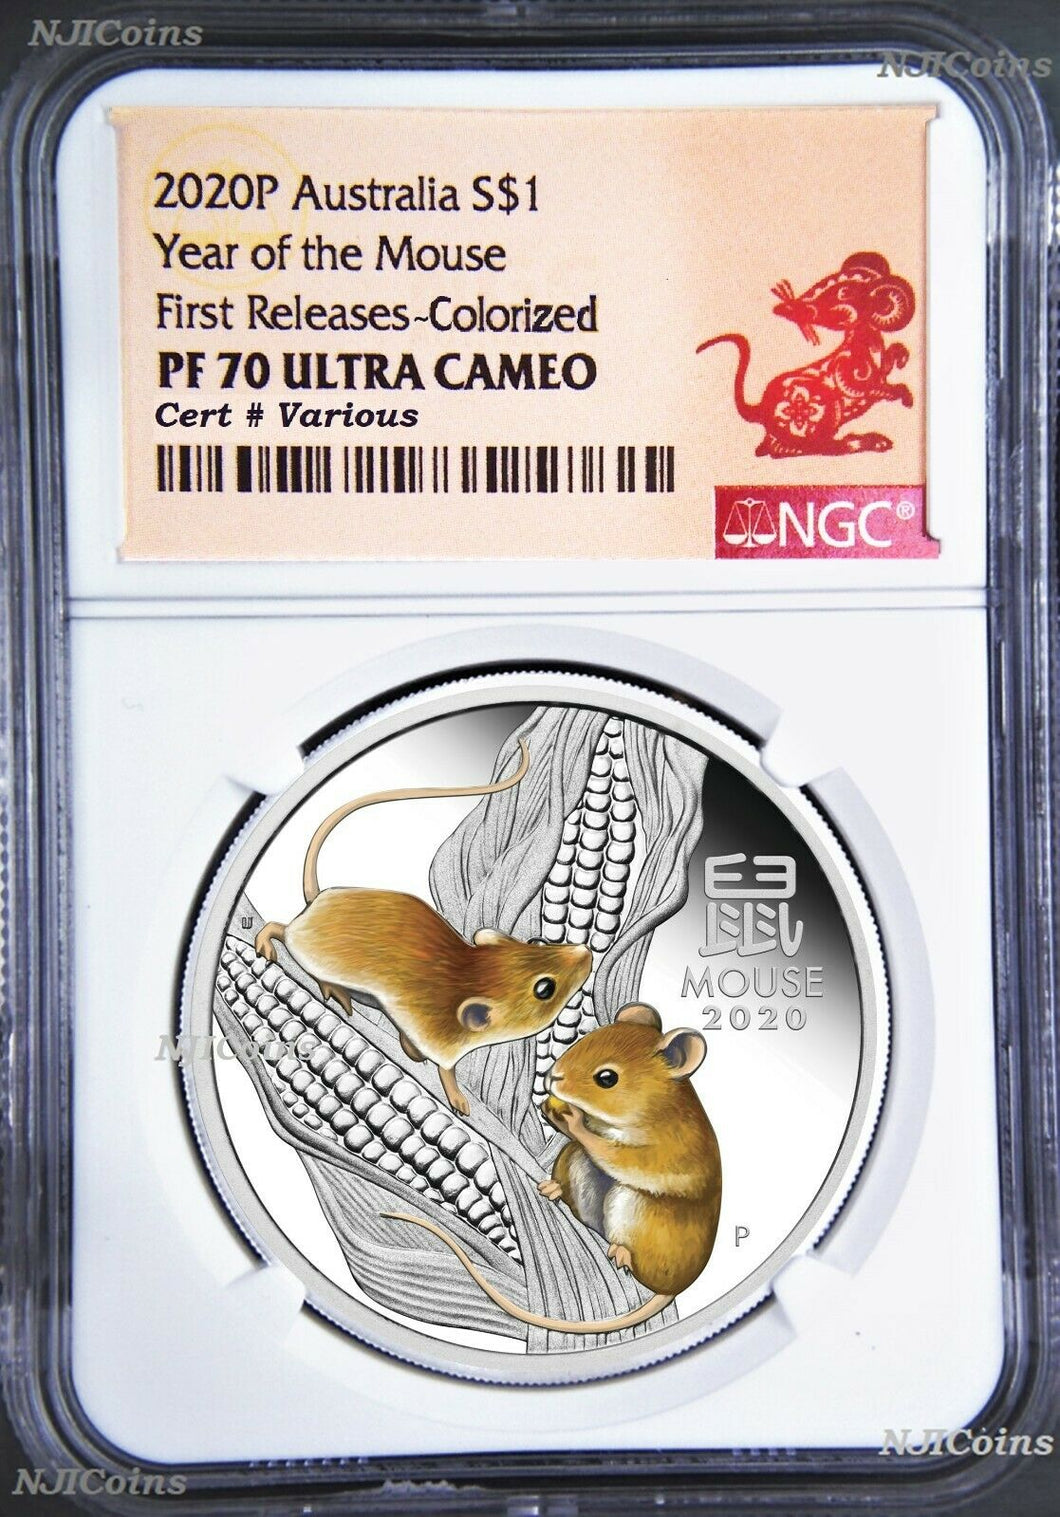 2020 Australia PROOF Colored Silver Lunar Year of the MOUSE NGC PF70 1oz Coin FR